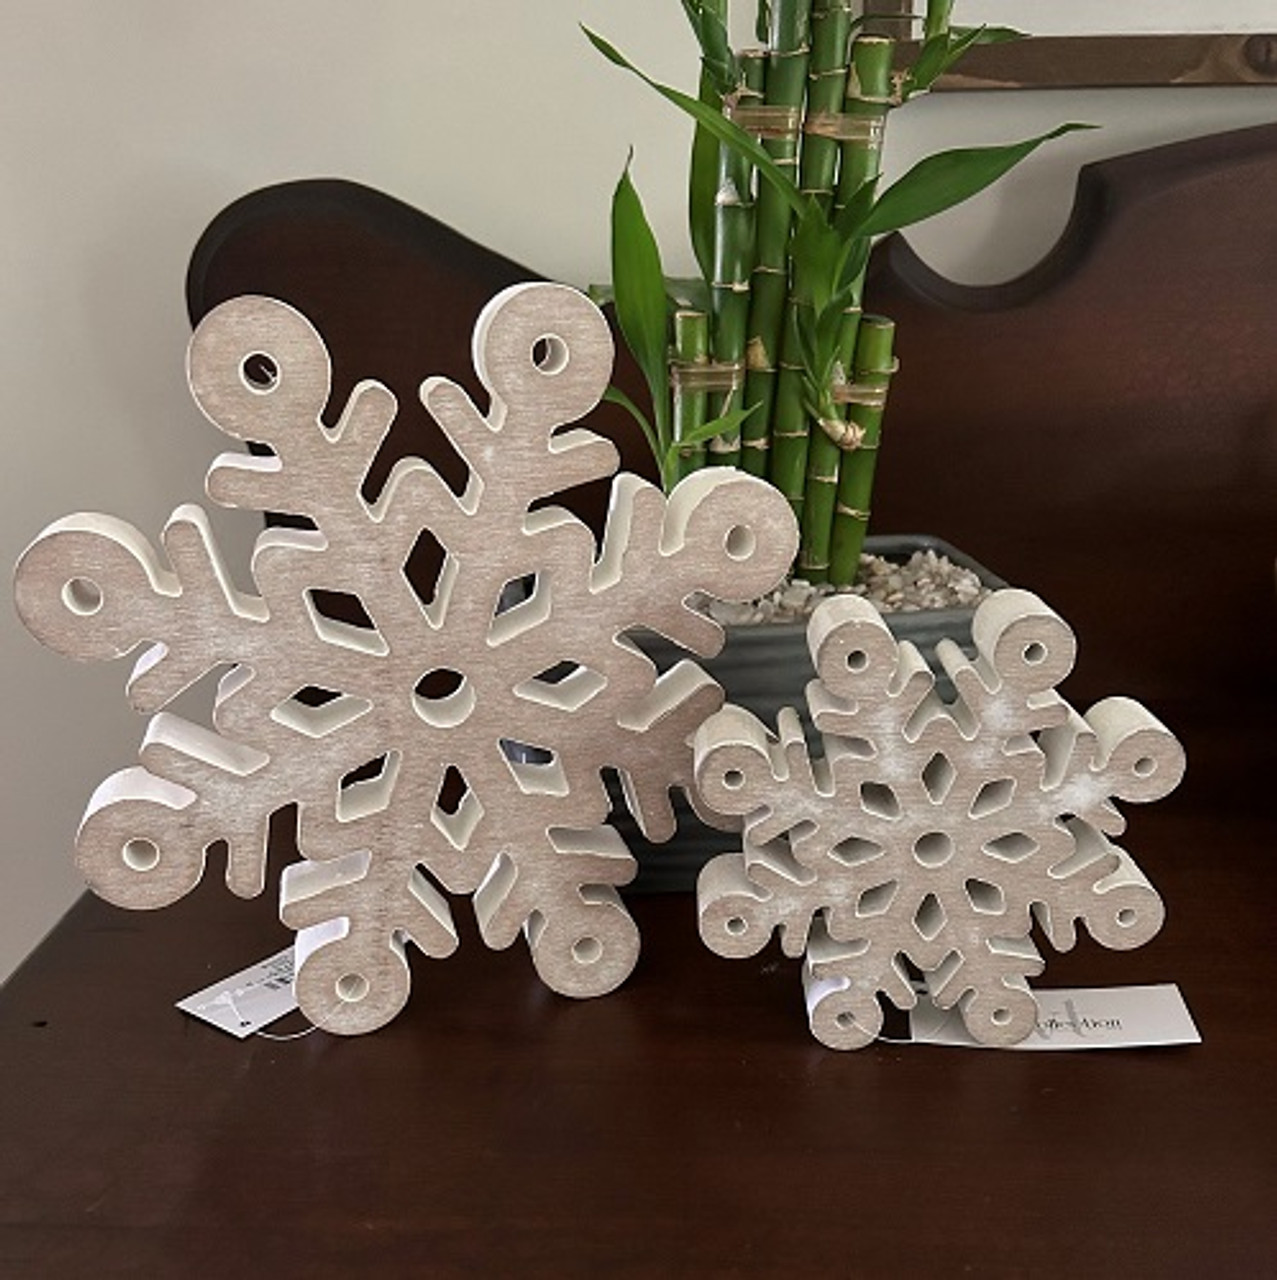 Wood Snowflake Sitter (2 Count Assortment)  Wood snowflake, Wooden  snowflakes, Snowflakes